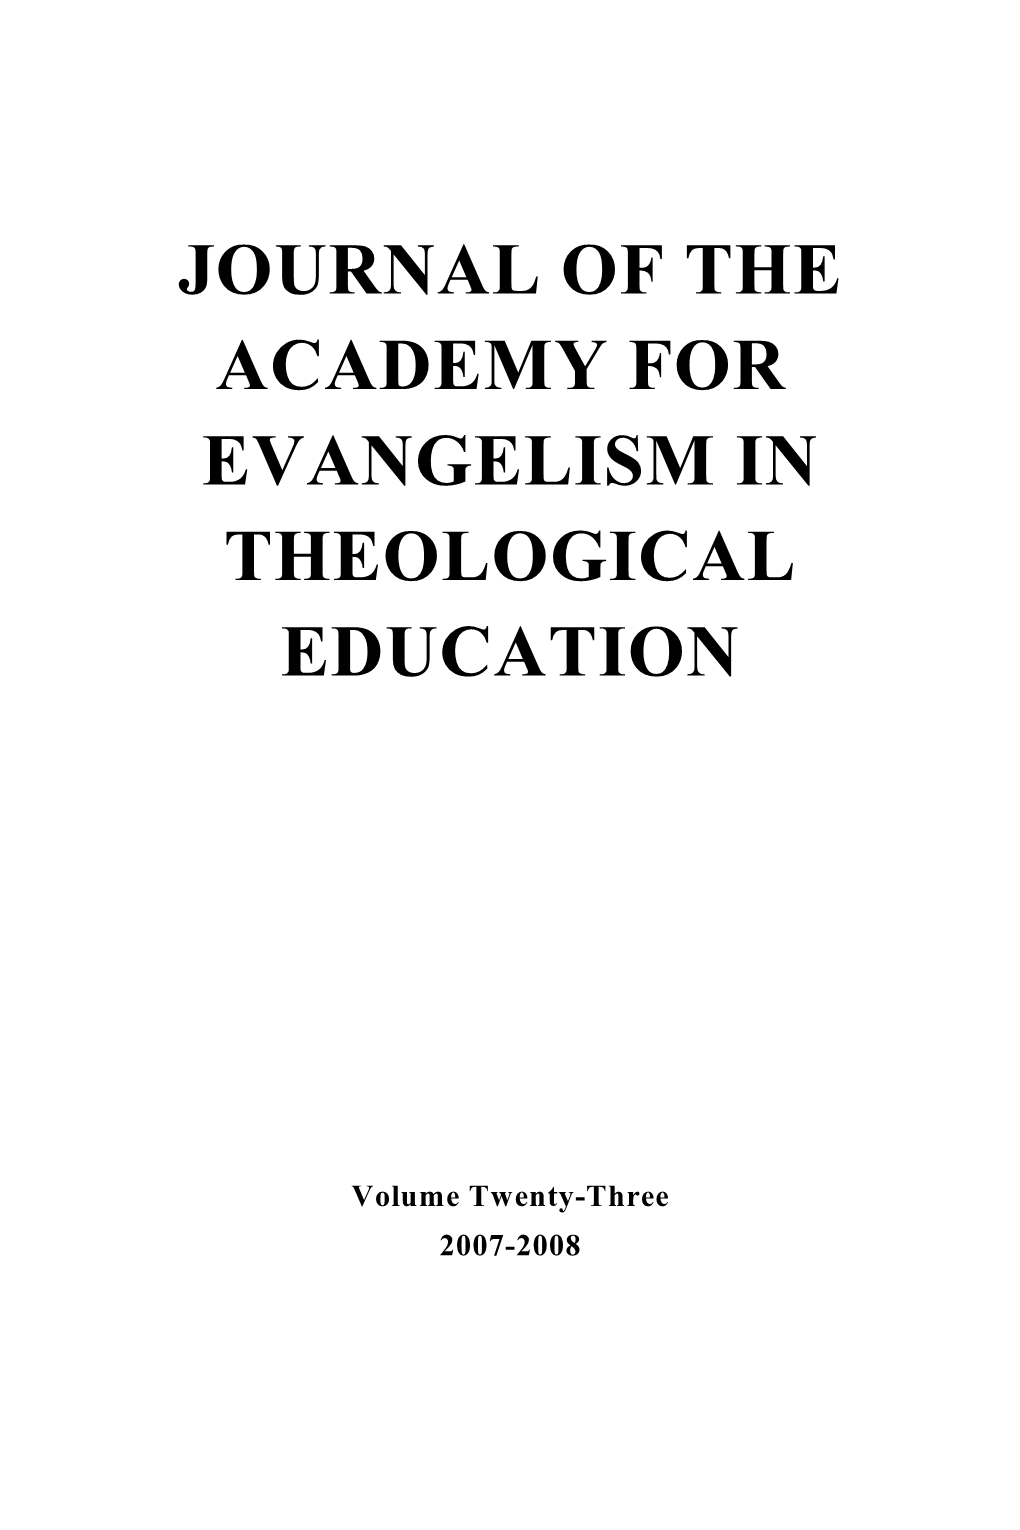 The Academy for Evangelism in Theological Education